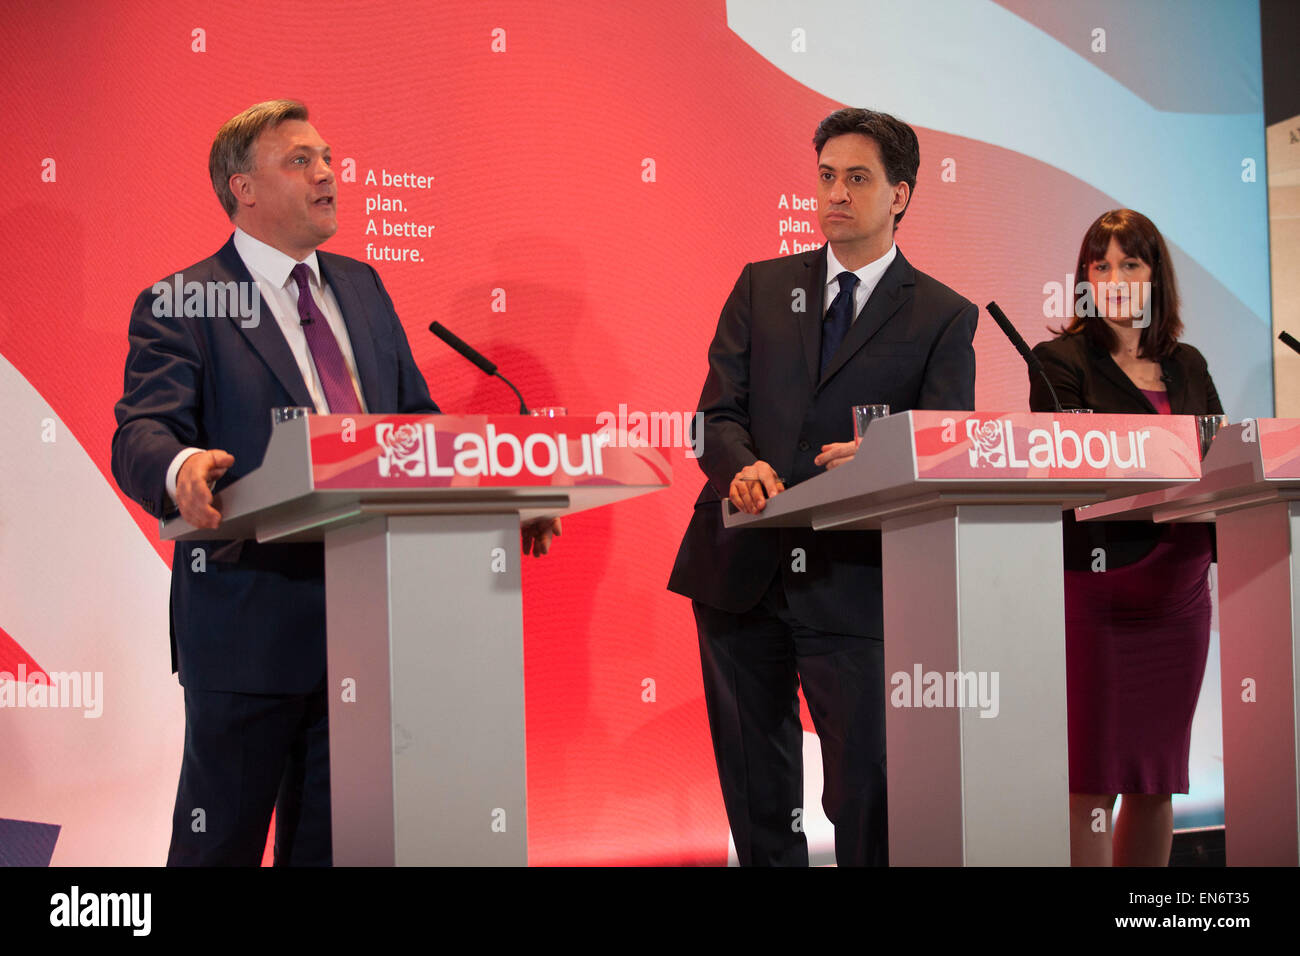 London, UK. Wednesday 29th April 2015. Labour Party Leader Ed Miliband, Shadow Chancellor Ed Balls, and Shadow Secretary of State for Work and Pensions Rachel Reeves speaks at a General Election 2015 campaign event on the Tory threat to family finances, entitled: The Tories’ Secret Plan. Held at the Royal Institute of British Architects. Credit:  Michael Kemp/Alamy Live News Stock Photo